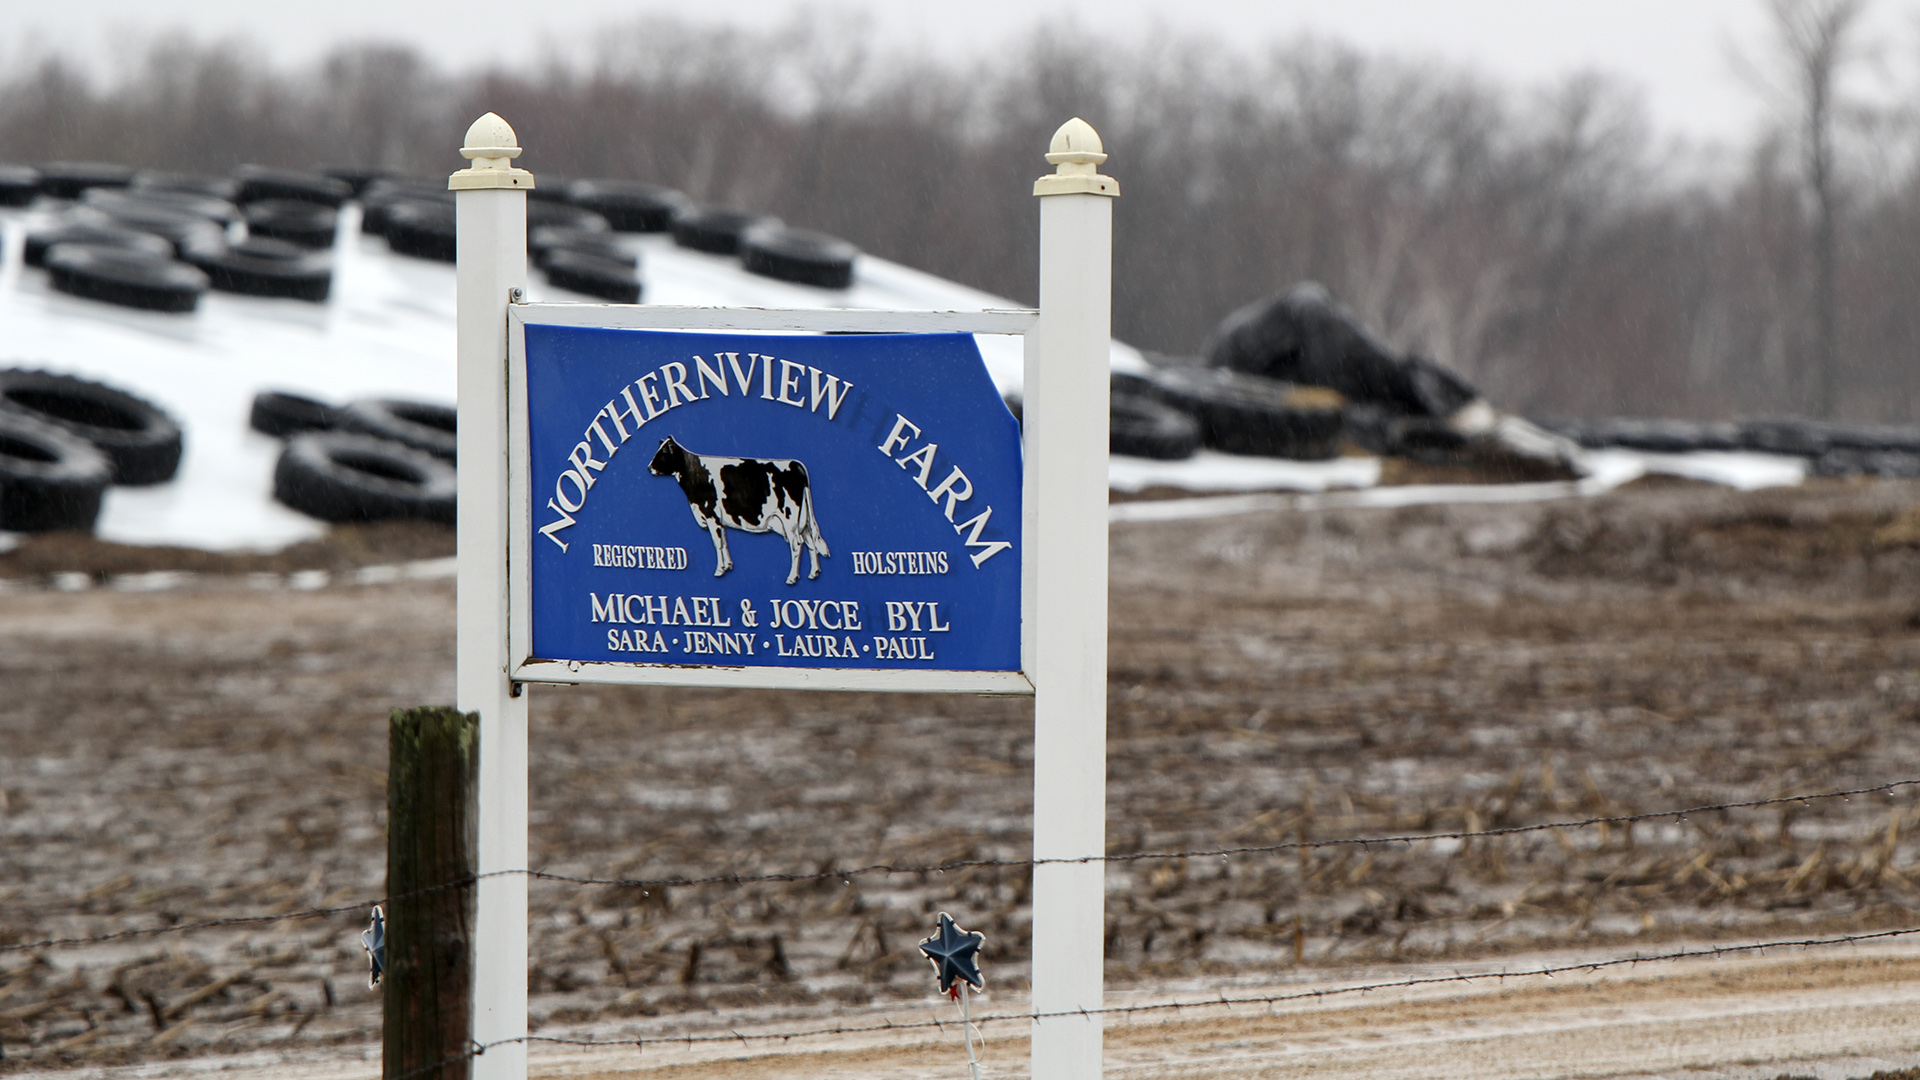 A sign with an illustration of a Holstein cows and the words "Northernview Farm," Registered Holsteins" and the names of the proprietors stands next to a barbed wire fence, with a farm field, a feed pile topped with agricultural plastic sheets and tires, and line of trees in the background.